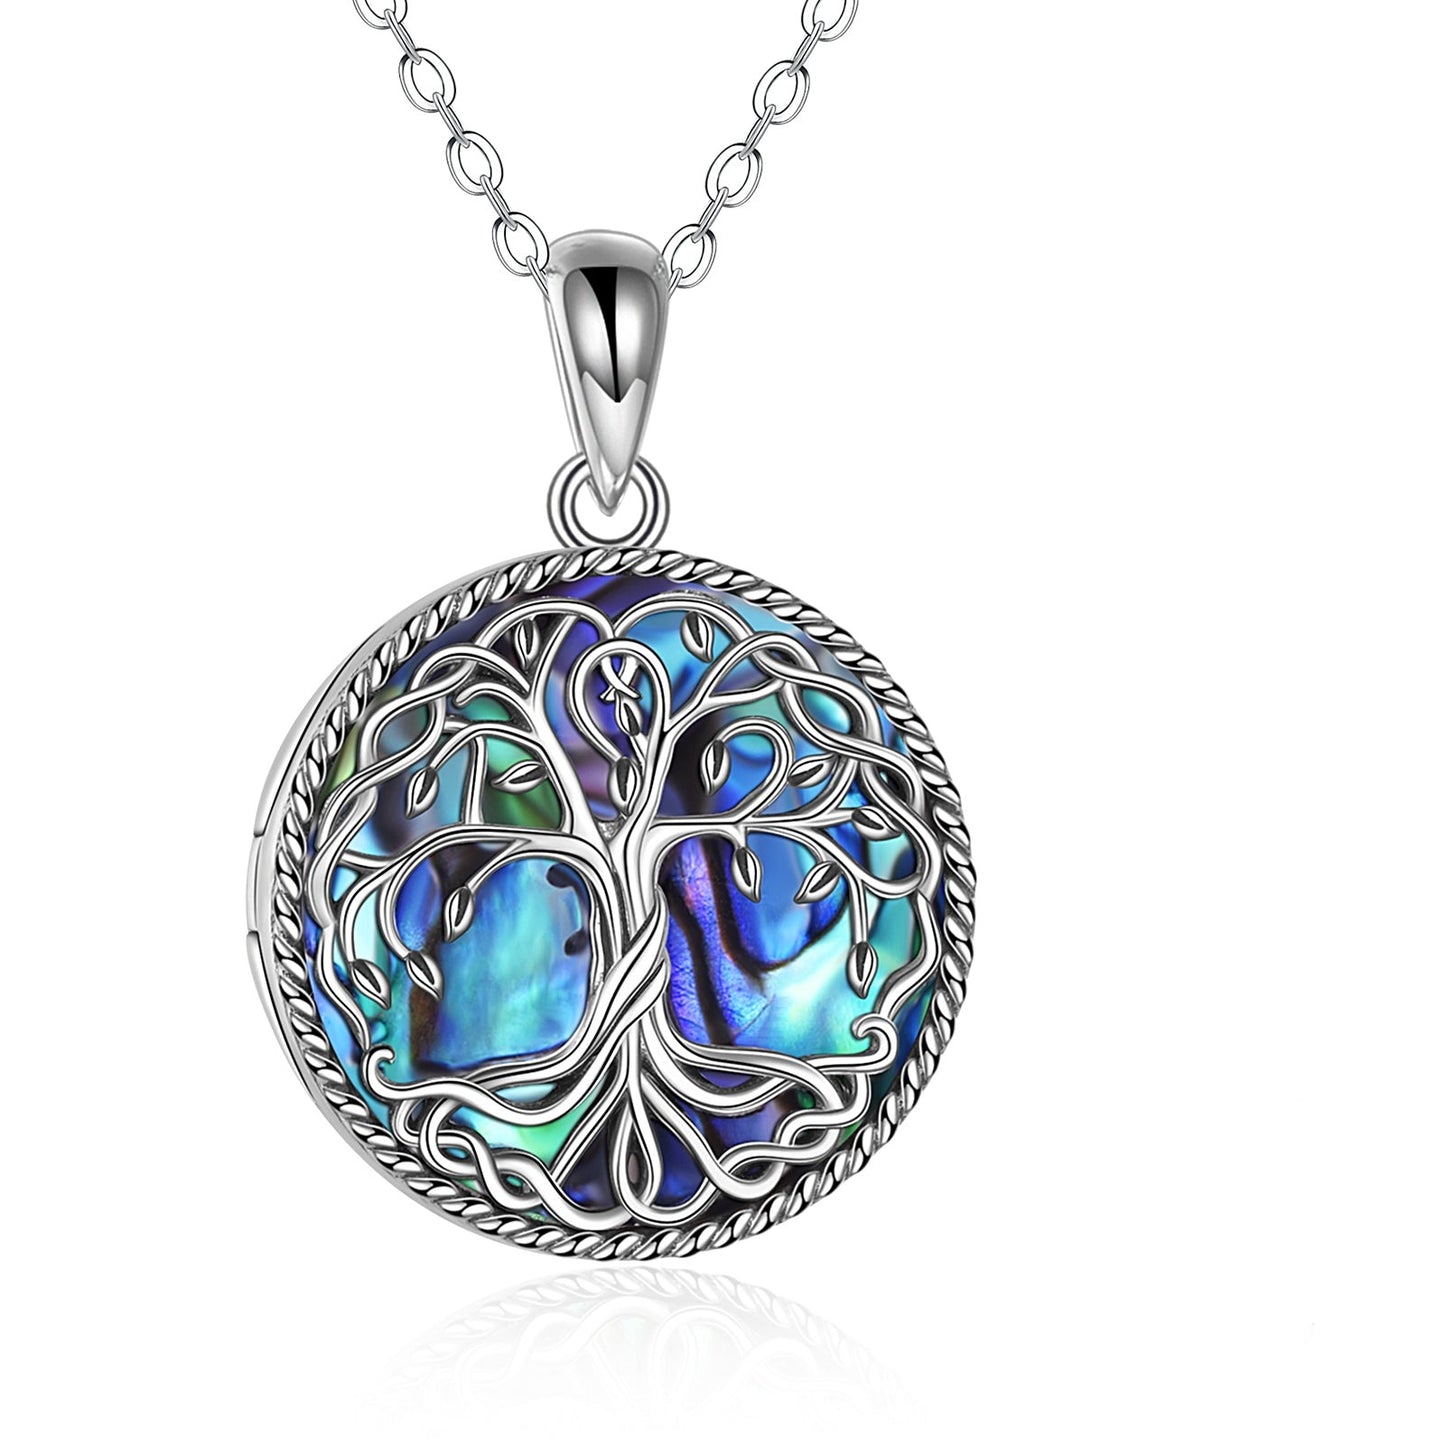 Tree of Life Locket Necklace Jewelry for Women Sterling Silver Celtic Family Tree Abalone Shell Lockets Jewelry Gifts for Mom Daughter - Niki Ice Jewelry 